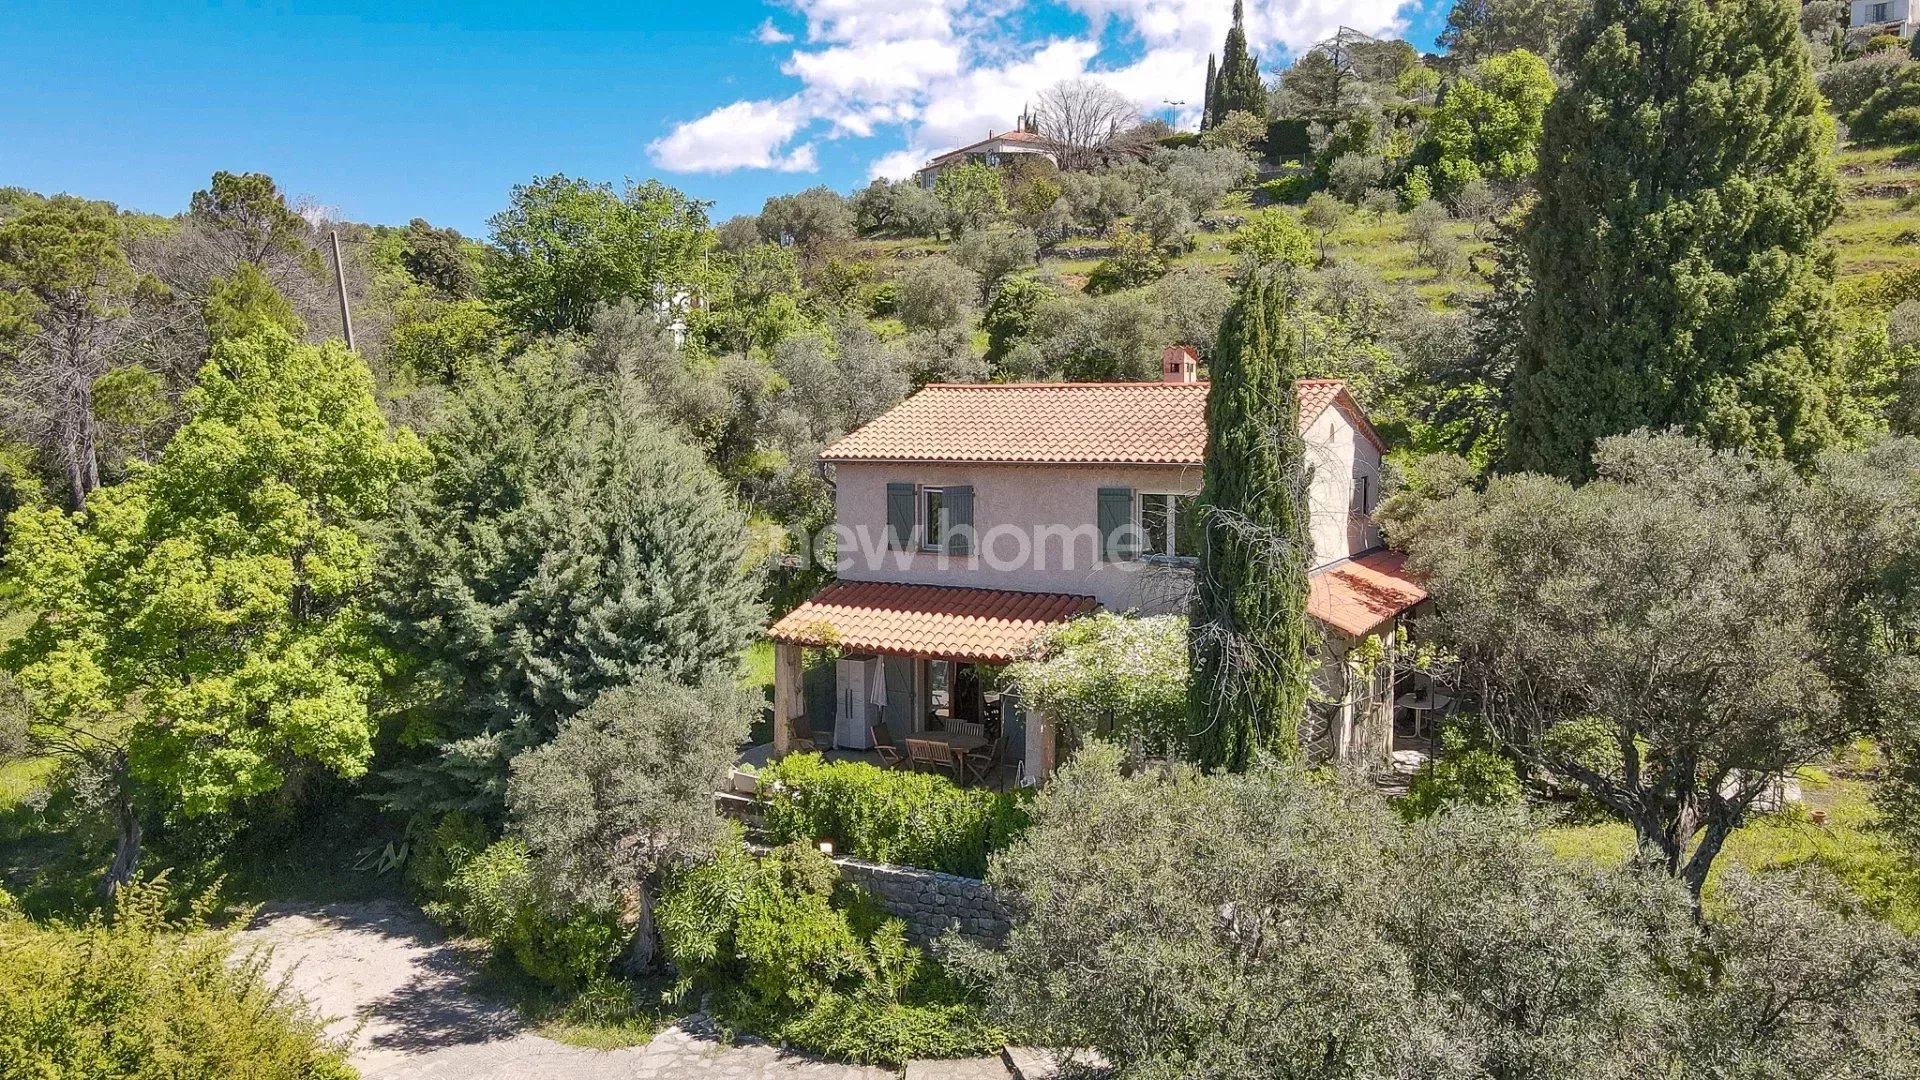 In Provence Fayence villa, panoramique vieuw, walking distance from old center